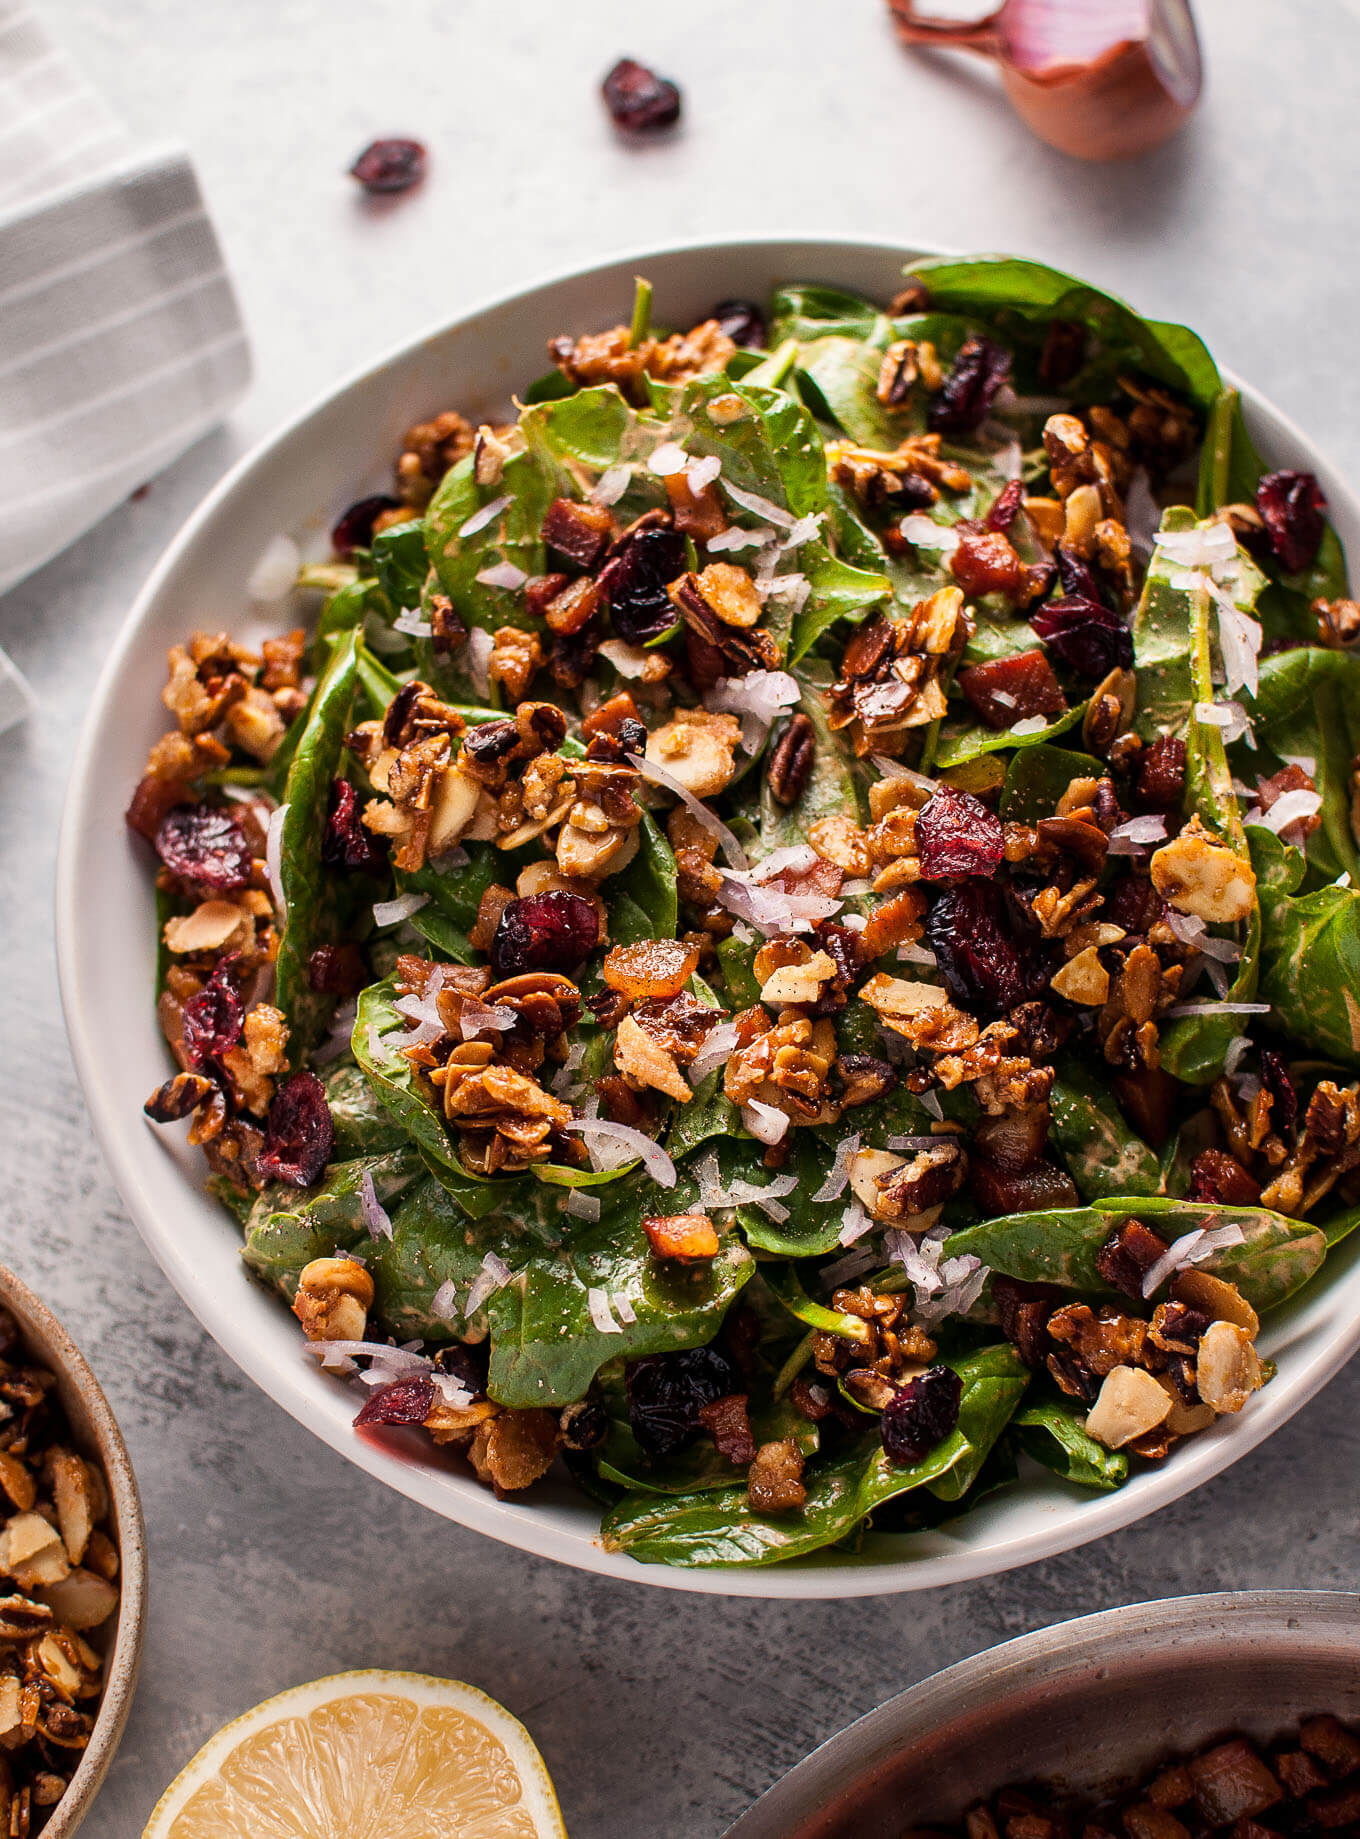 Spinach Salad with Crispy Pancetta and Candied Nuts